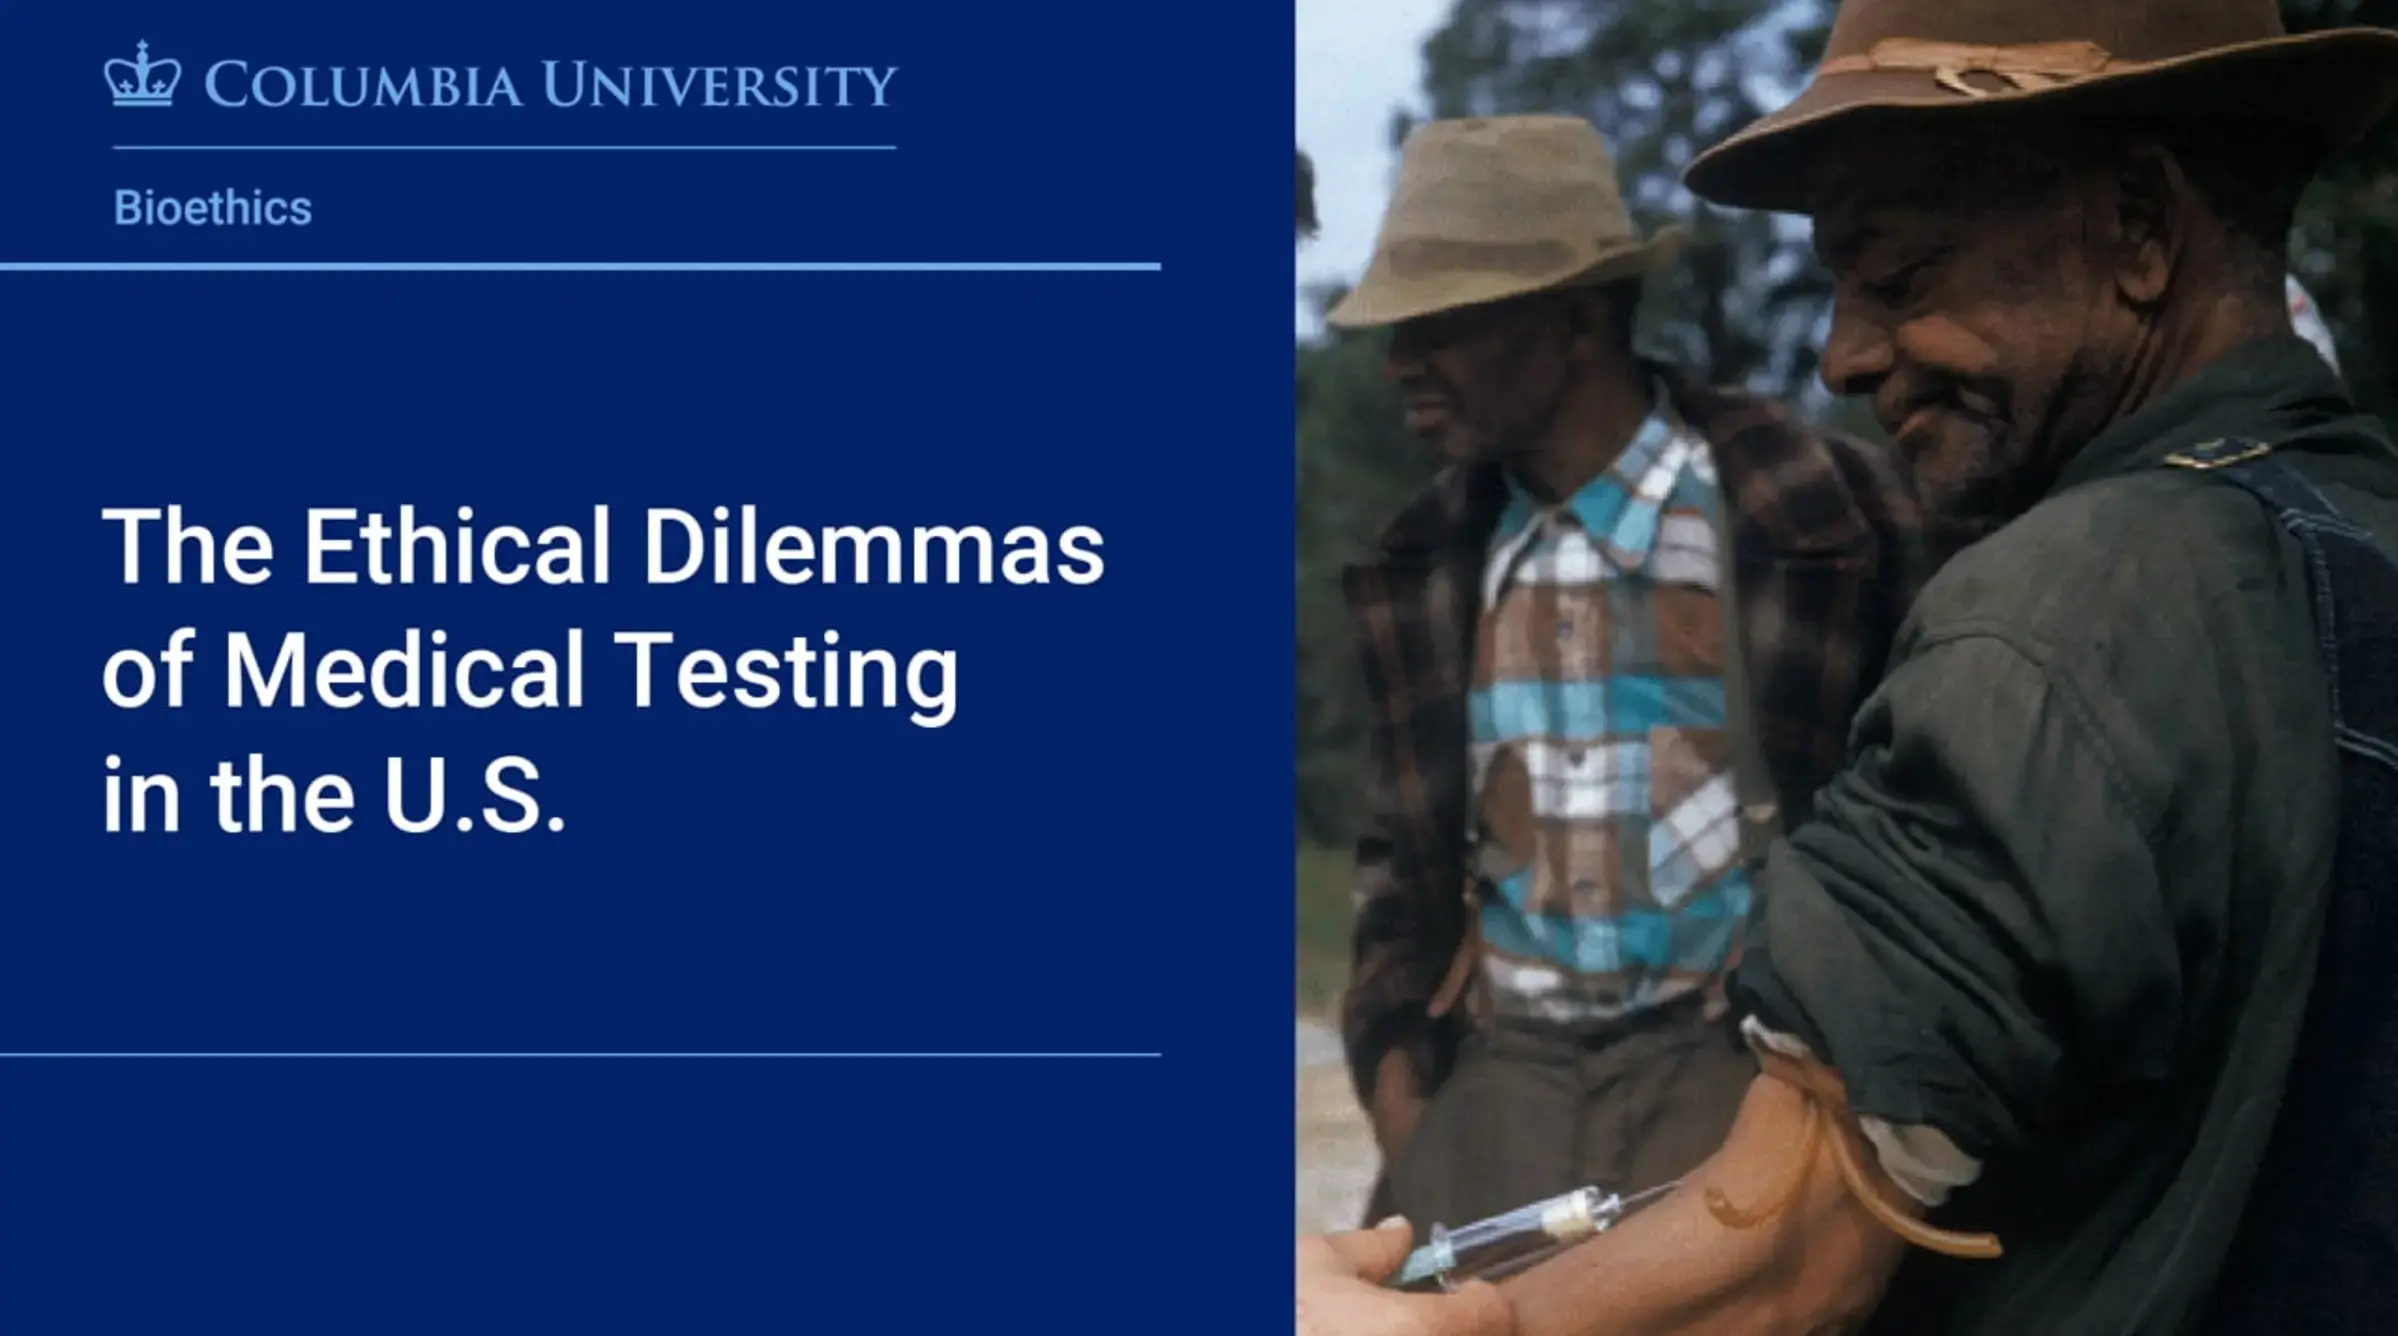 The Ethical Dilemmas of Medical Testing in the U.S. - Harriet A. Washington